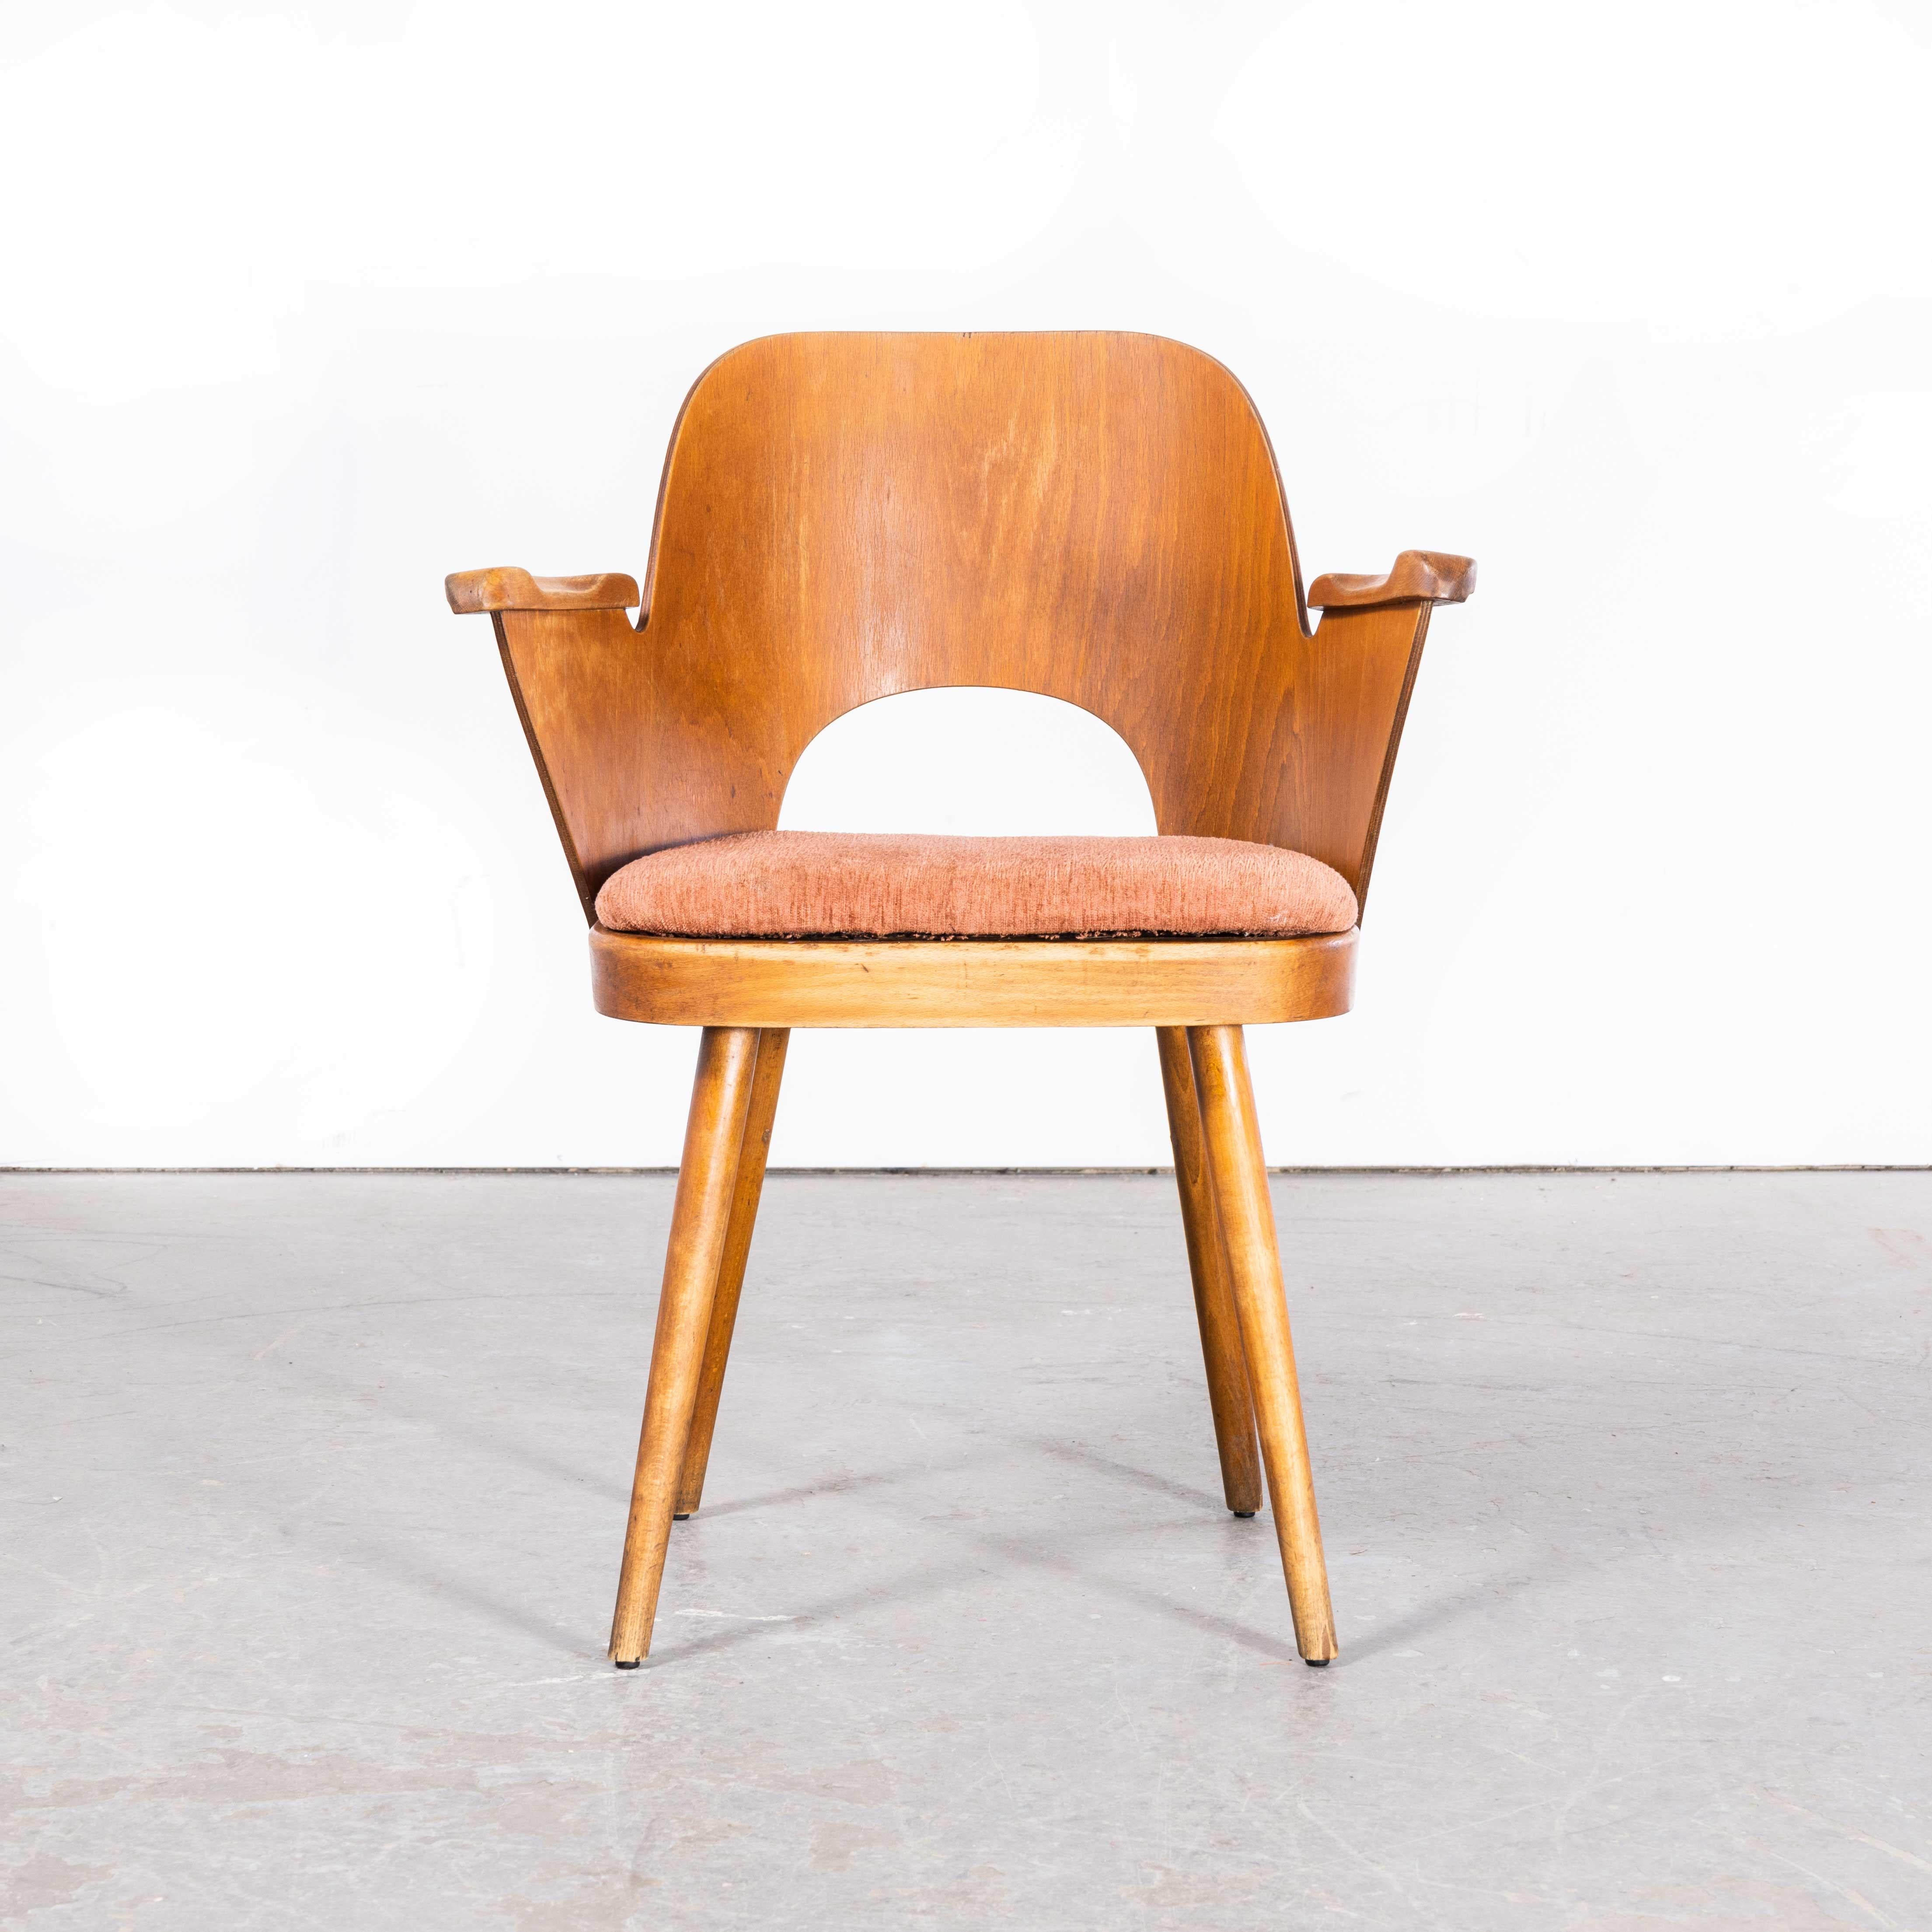 1960’s Upholstered Side – Arm Chair – Oswald Haerdtl
1960’s Upholstered Side – Arm Chair – Oswald Haerdtl. This chairs was produced by the famous Czech firm Ton, still trading today and producing beautiful furniture, they are an offshoot of Thonet.